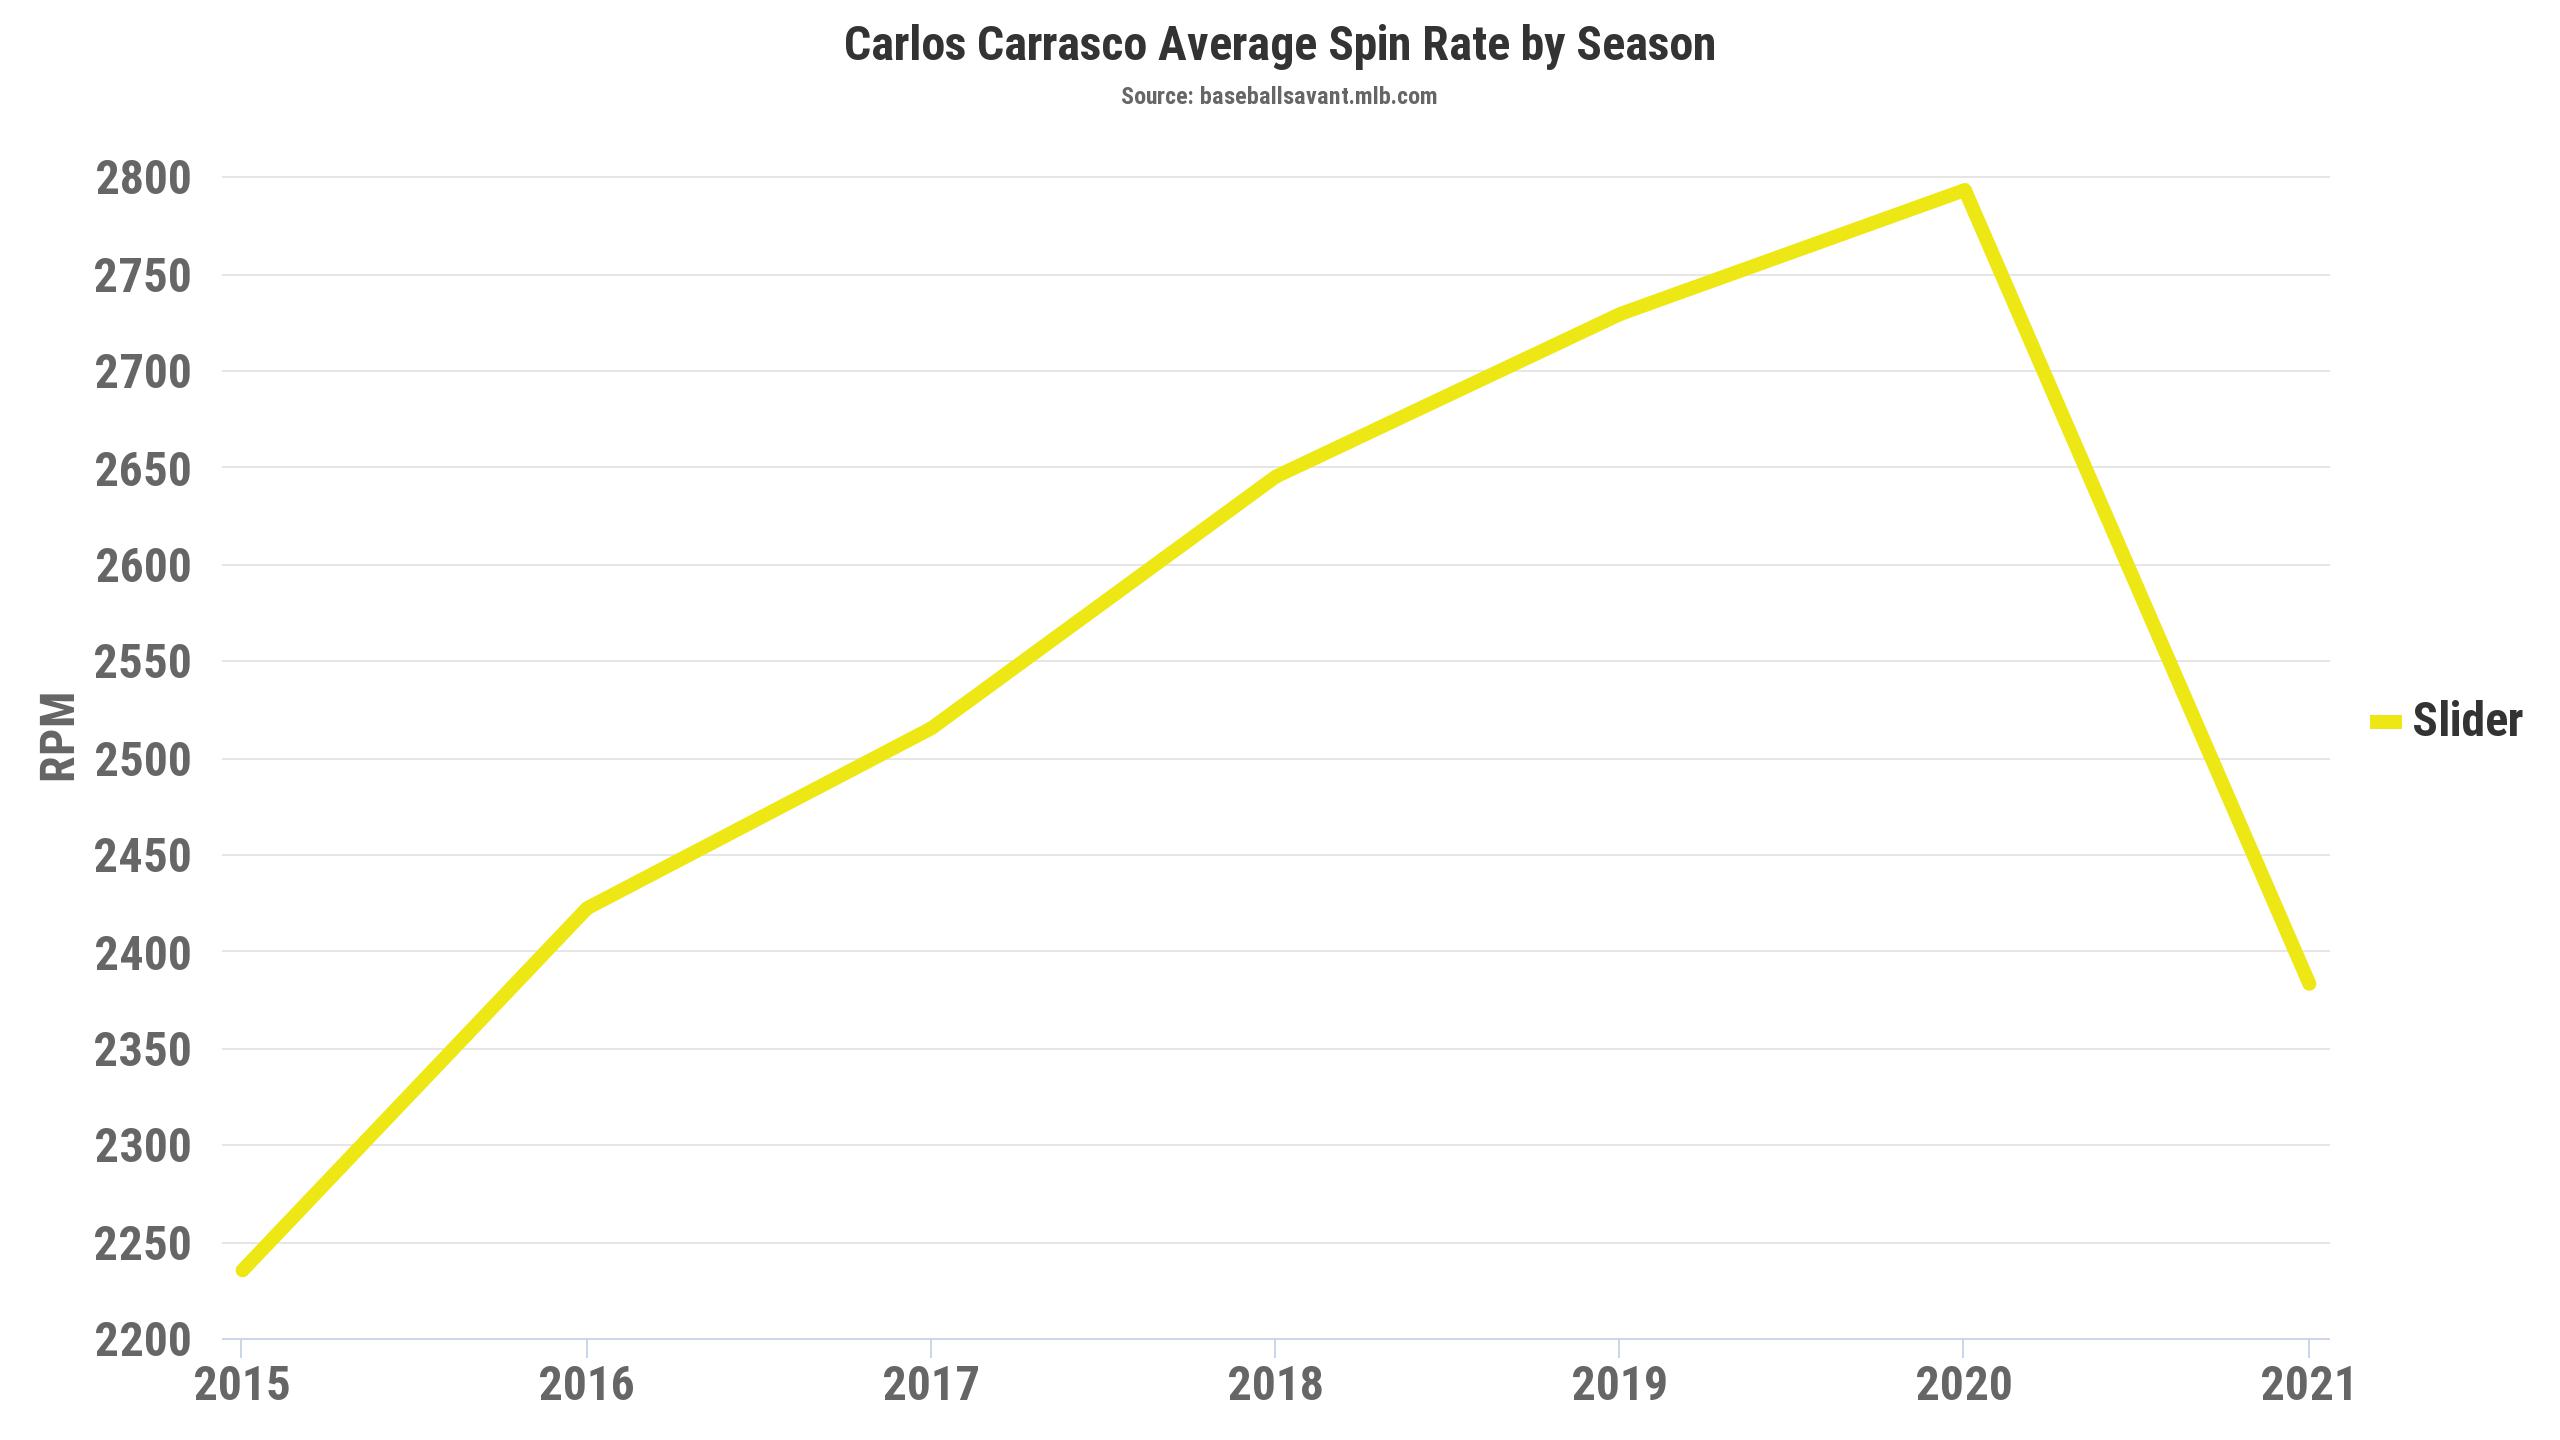 Opinion: Healthy Carrasco Would Be Huge Boost To Mets Rotation